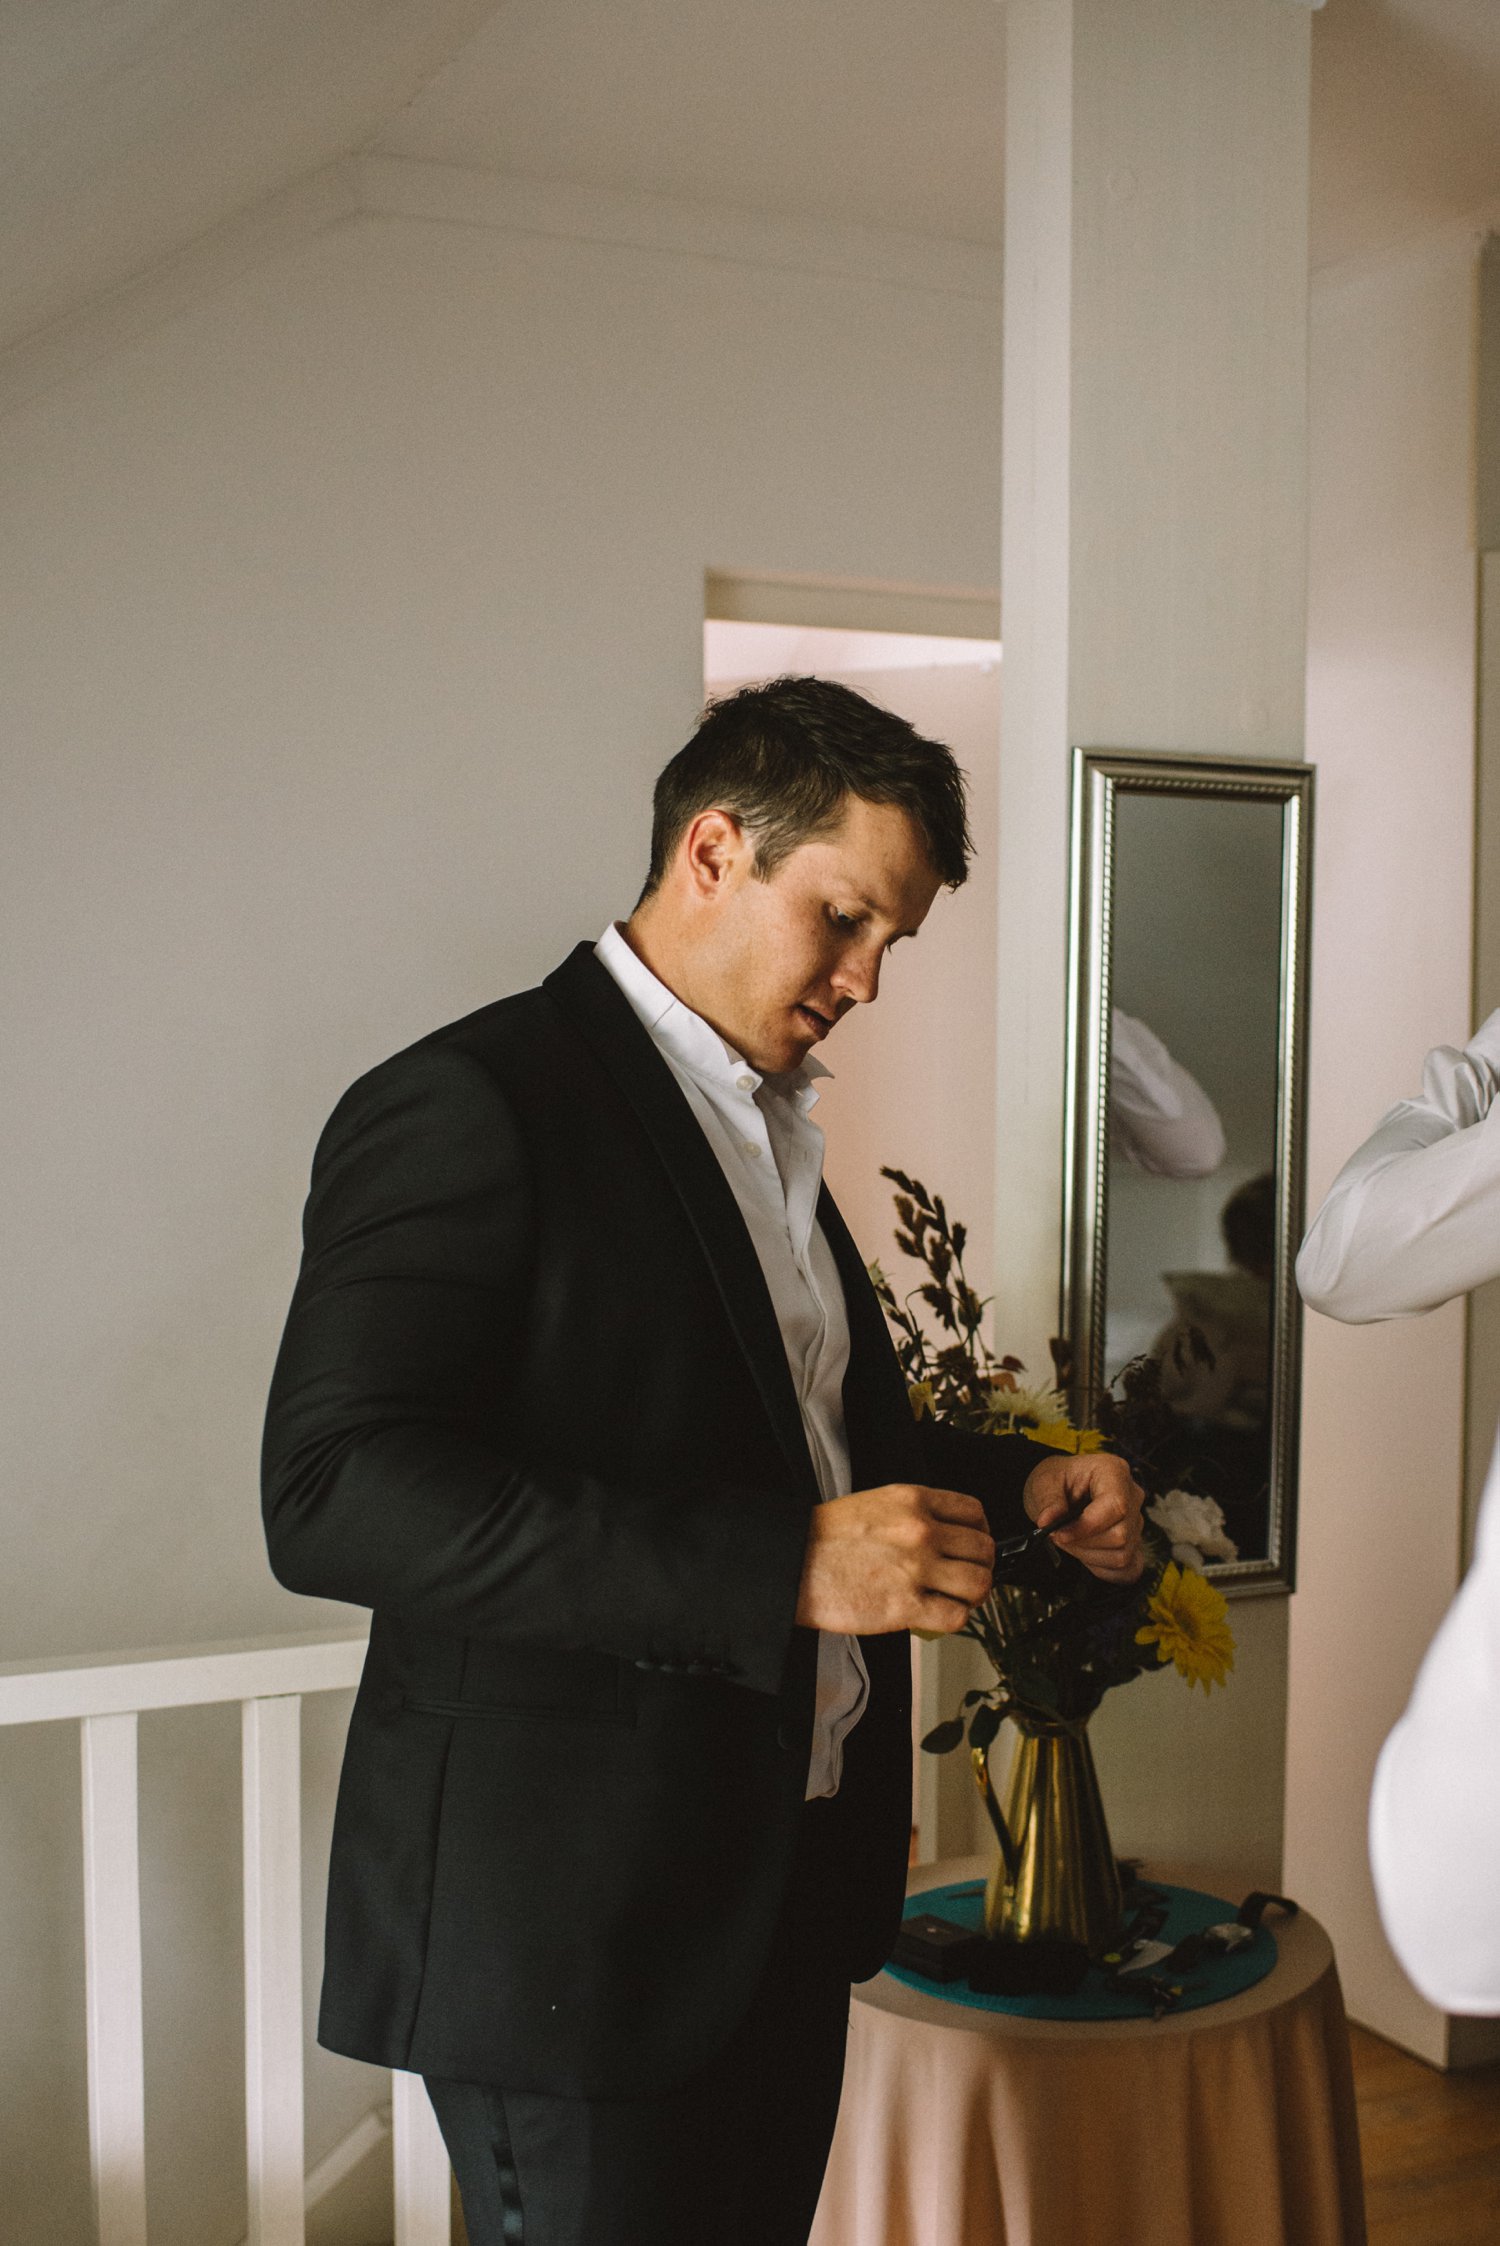 Classy Plettenberg Bay Wedding with Jason and Caileigh